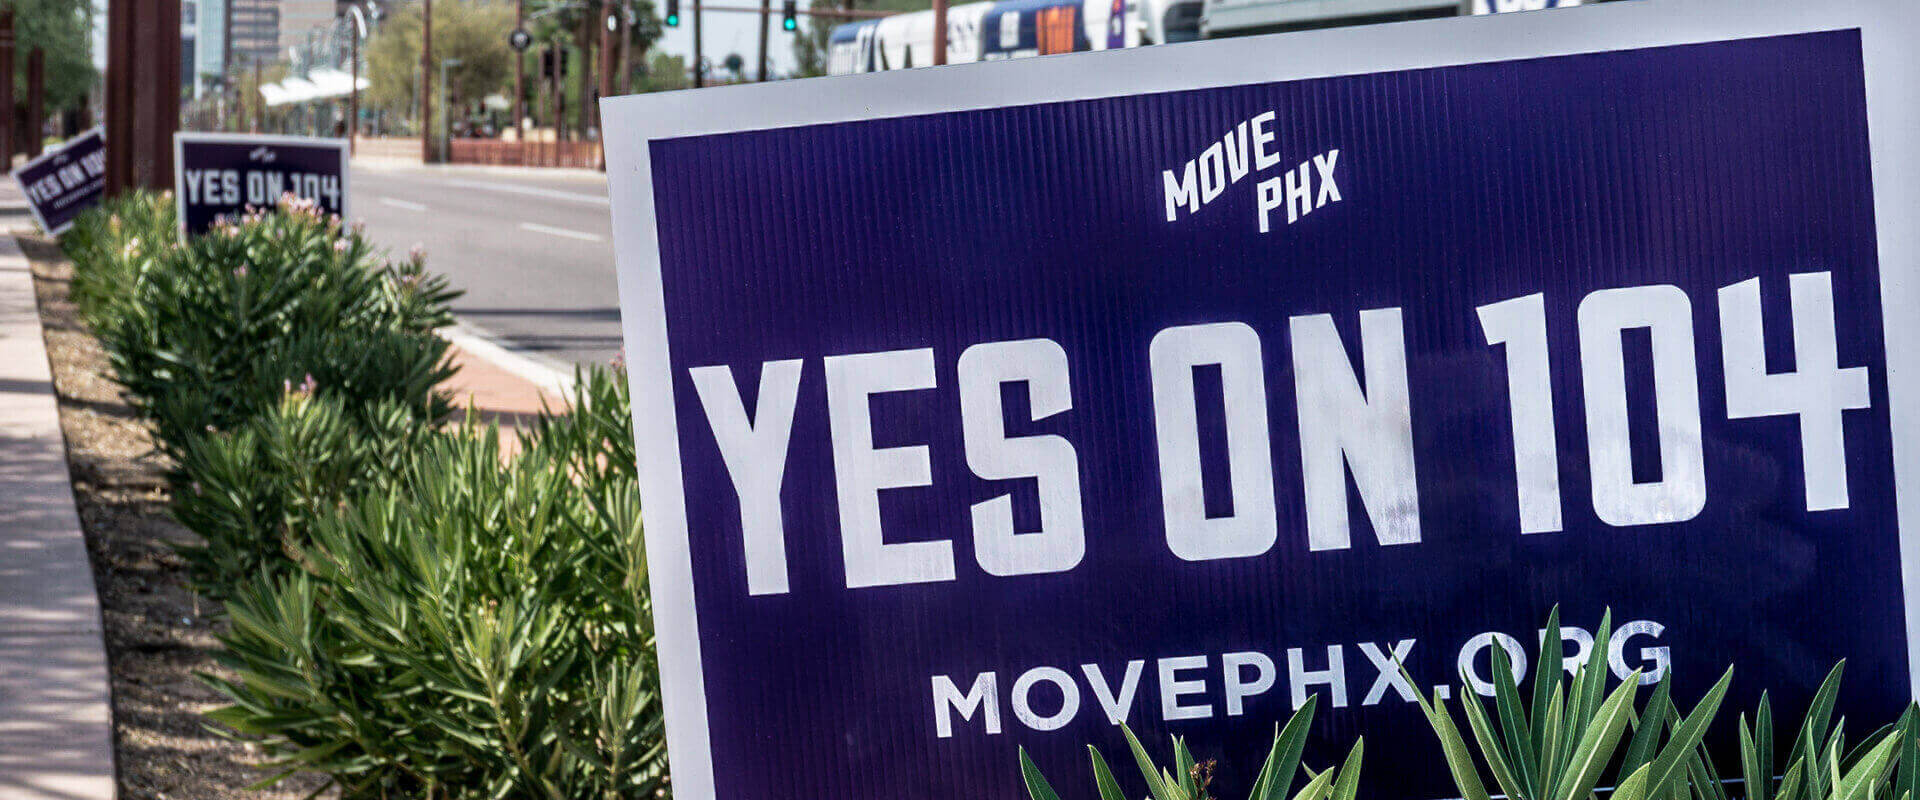 Brand Stories Prop 104 MovePHX Municipal Transportation System Campaign Road Signs